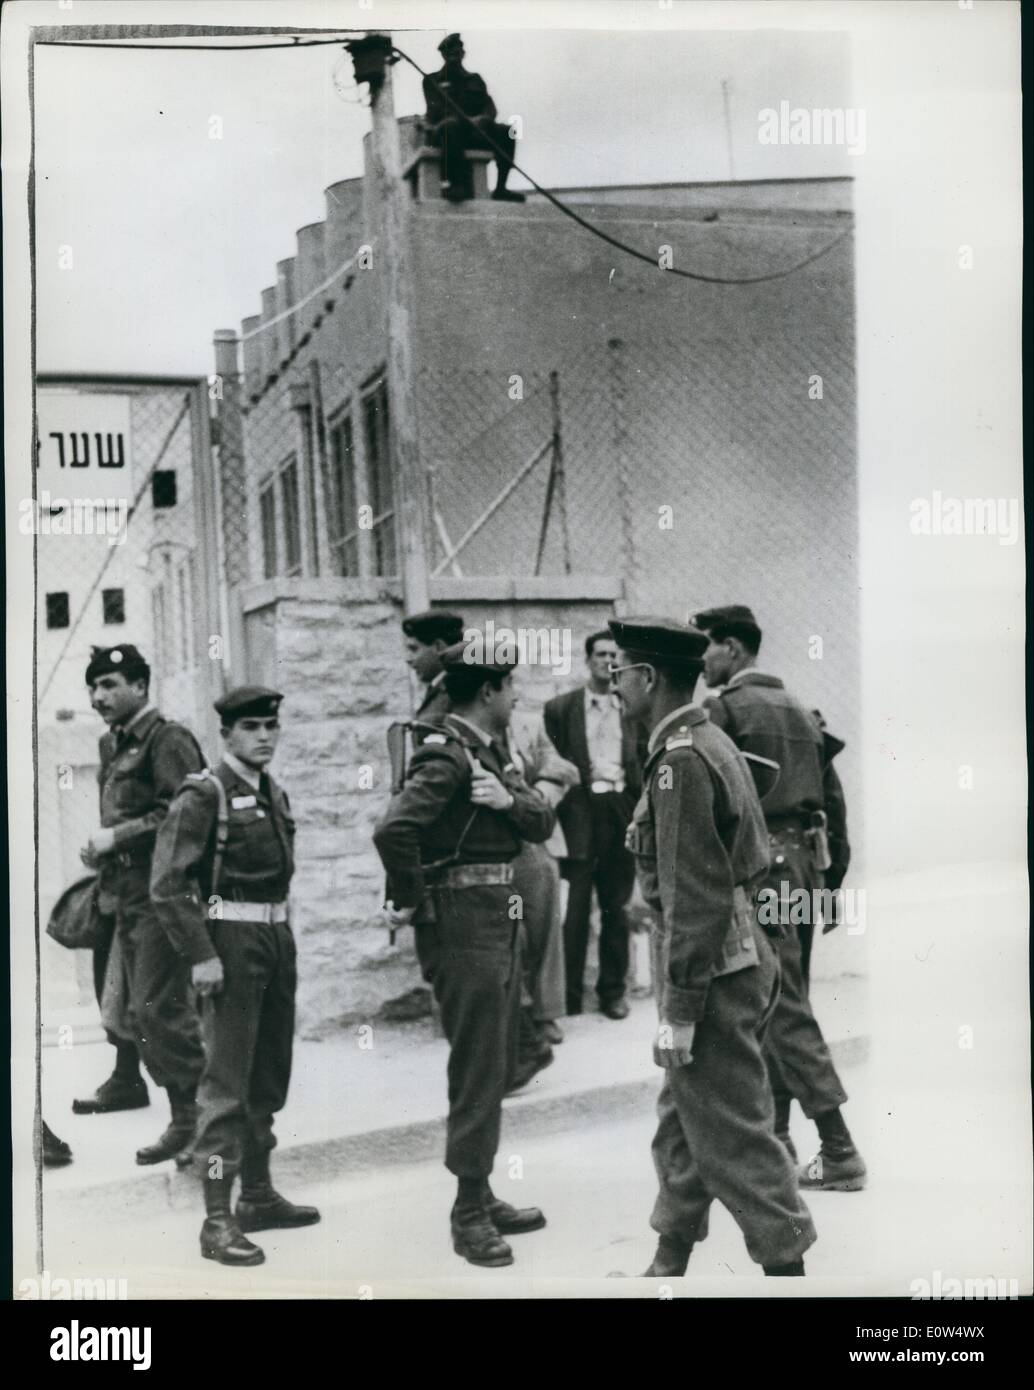 May 05, 1961 - The Eichmann trial continues in Jerusalem. The Guard outside court building is changed: The trial of Adolf Eichmann former Nazi leader accused of the mass murder of millions of Jews in wartime concentration camps - continues in Jerusalem. Photo Shows A full guard is kept on duty at all times during the trial of Eichmann in Jerusalem. Here is the scene during the changing of the guard. Stock Photo